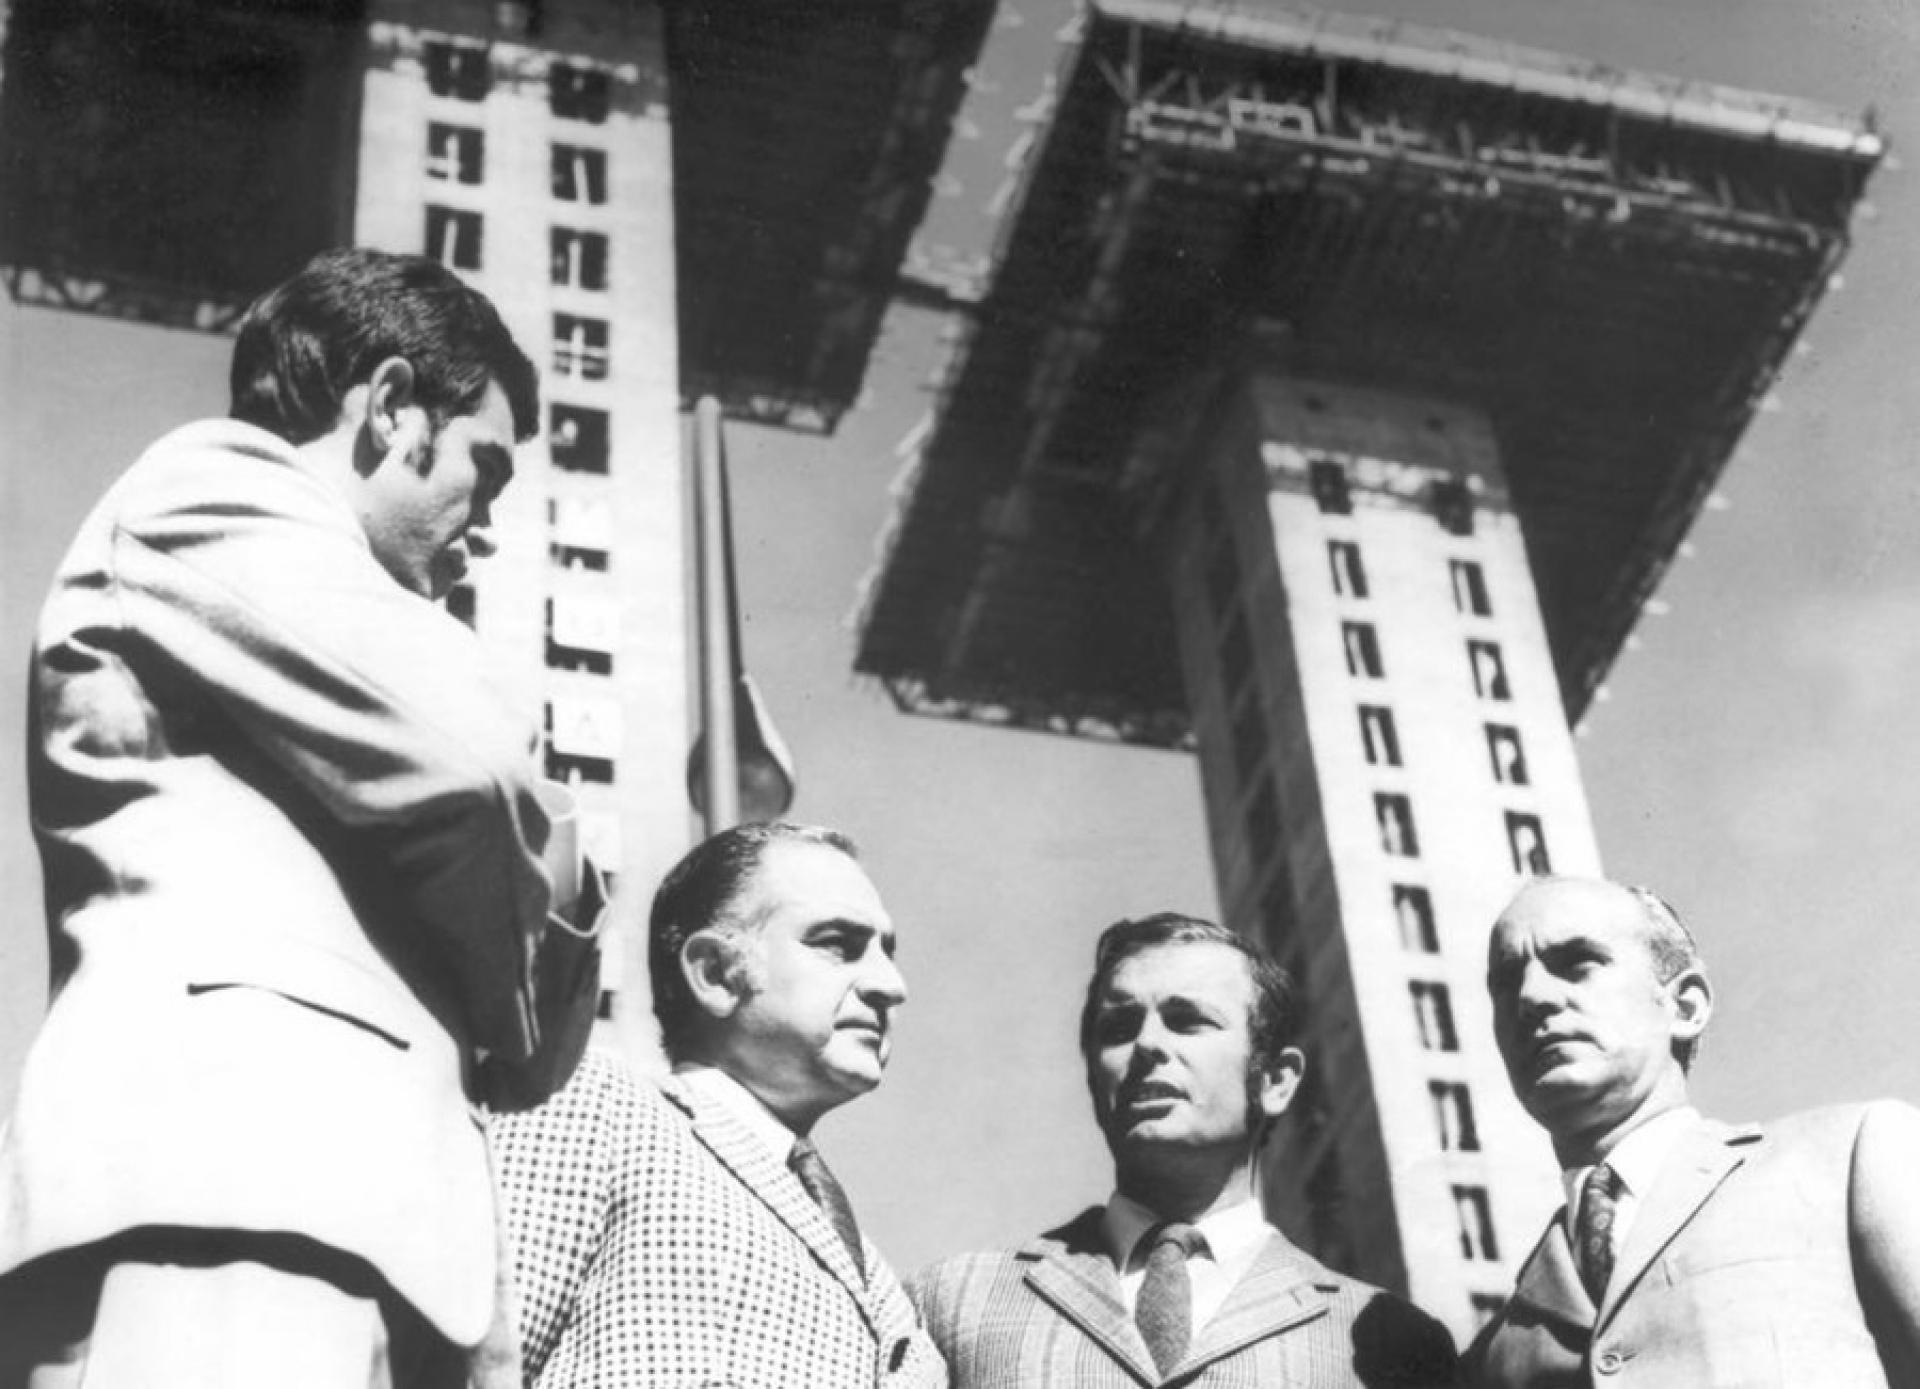 In order from left to right: Amador Lamela (Antonio’s brother), Antonio Lamela, Rudy Fliterman and José Veiga in front of the Colon Towers construction in Madrid. | Photo via Metalocus